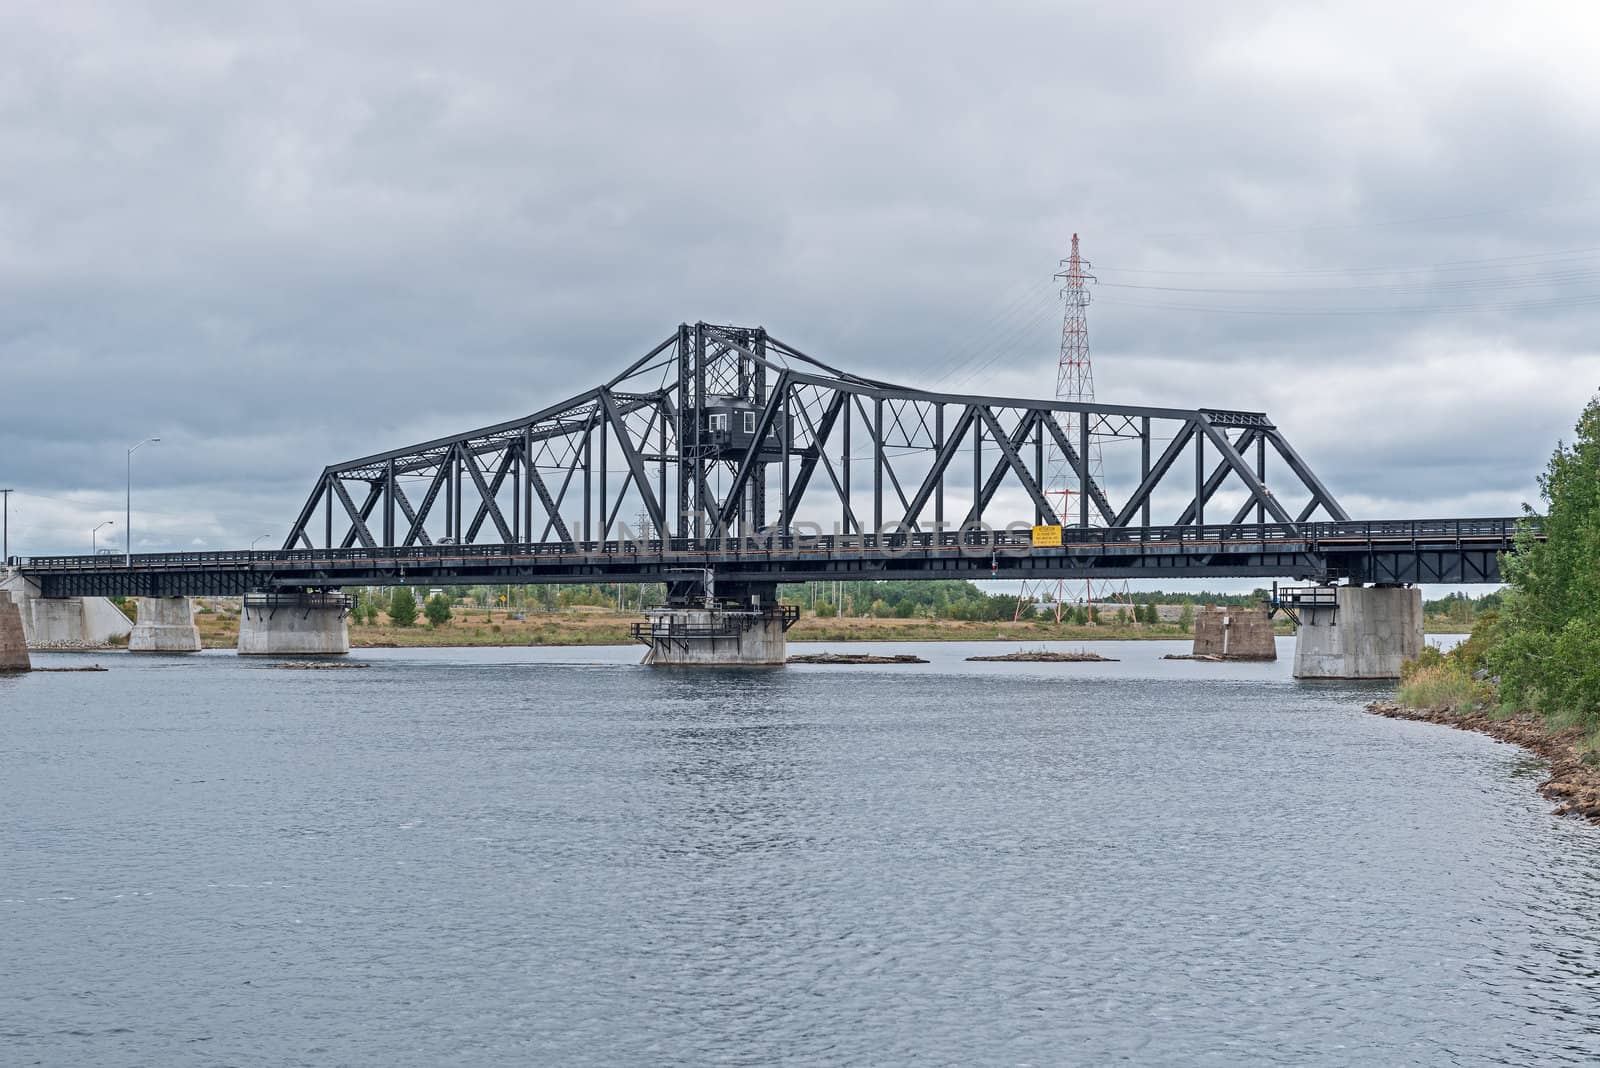 The bridge across a narrow channel separating Manitoulin Island from the much smaller Goat Island, forming the only land access. It consists of two 21 m (70 ft) deck plate girder approaches on the north end (Goat Island) and a single 18 m (60 ft) deck plate girder approach on the south end (Manitoulin Island), with a 112 m (368 ft) through swing bridge span. The swing bridge sits 5.3 m (17.5 ft) above mean water level, and provides a 48 m (160 ft) opening on either side of the central pier for water passage. Construction of the bridge was started by the Algoma Eastern Railway with the abutments and piers being built in 1912 and the bridge structure being erected in 1913. The Algoma Eastern Railway began operating trains across the bridge to the community of Little Current in October 1913. 